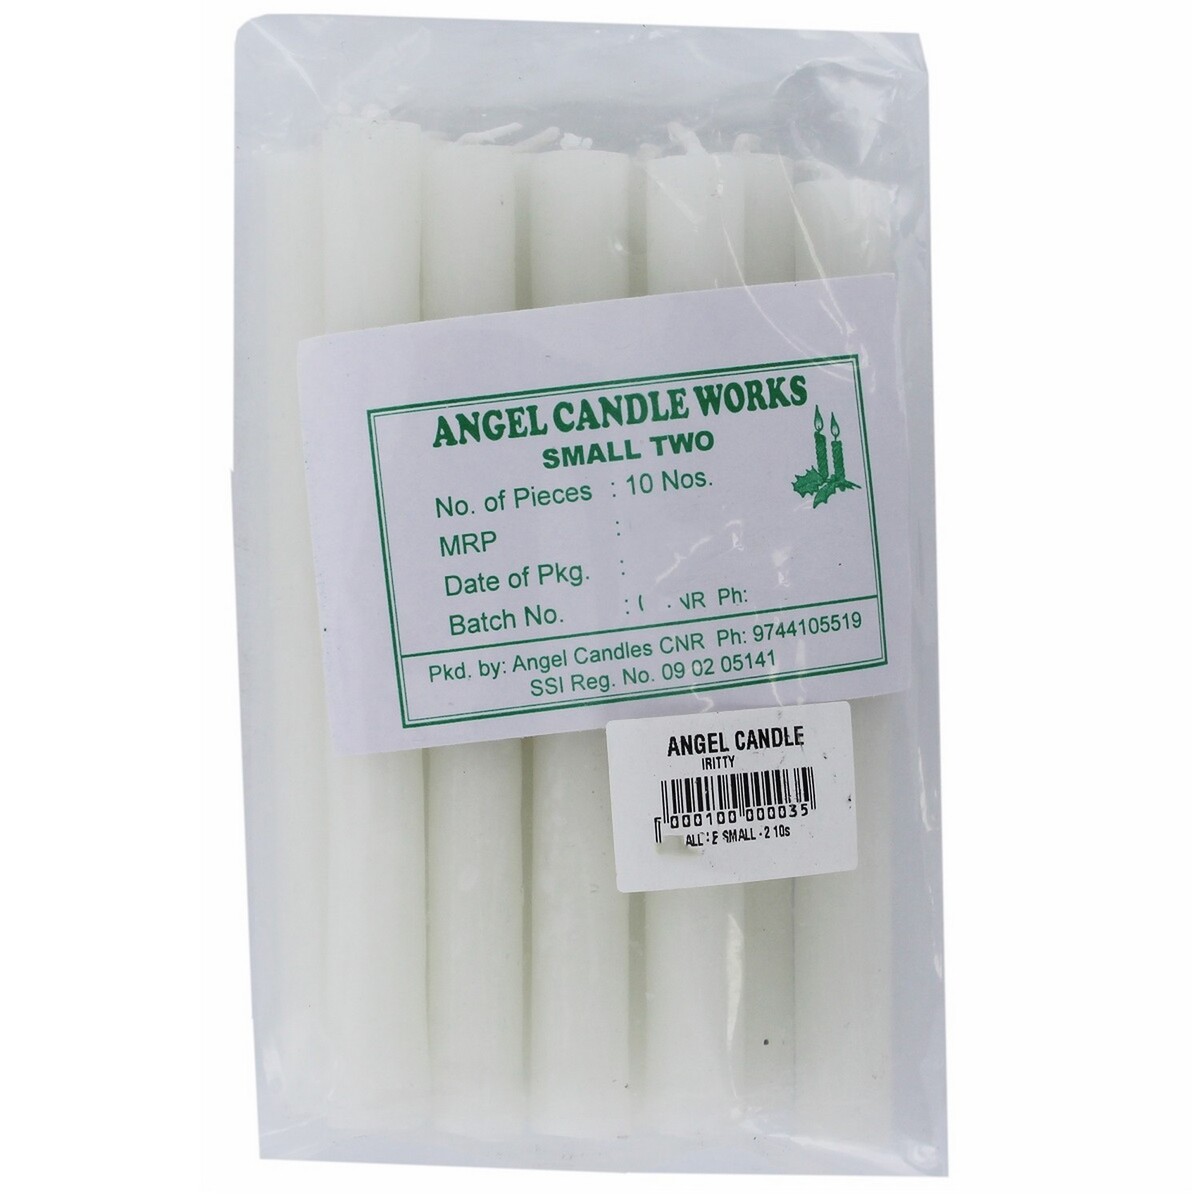 Angel Candle Small Two 10's